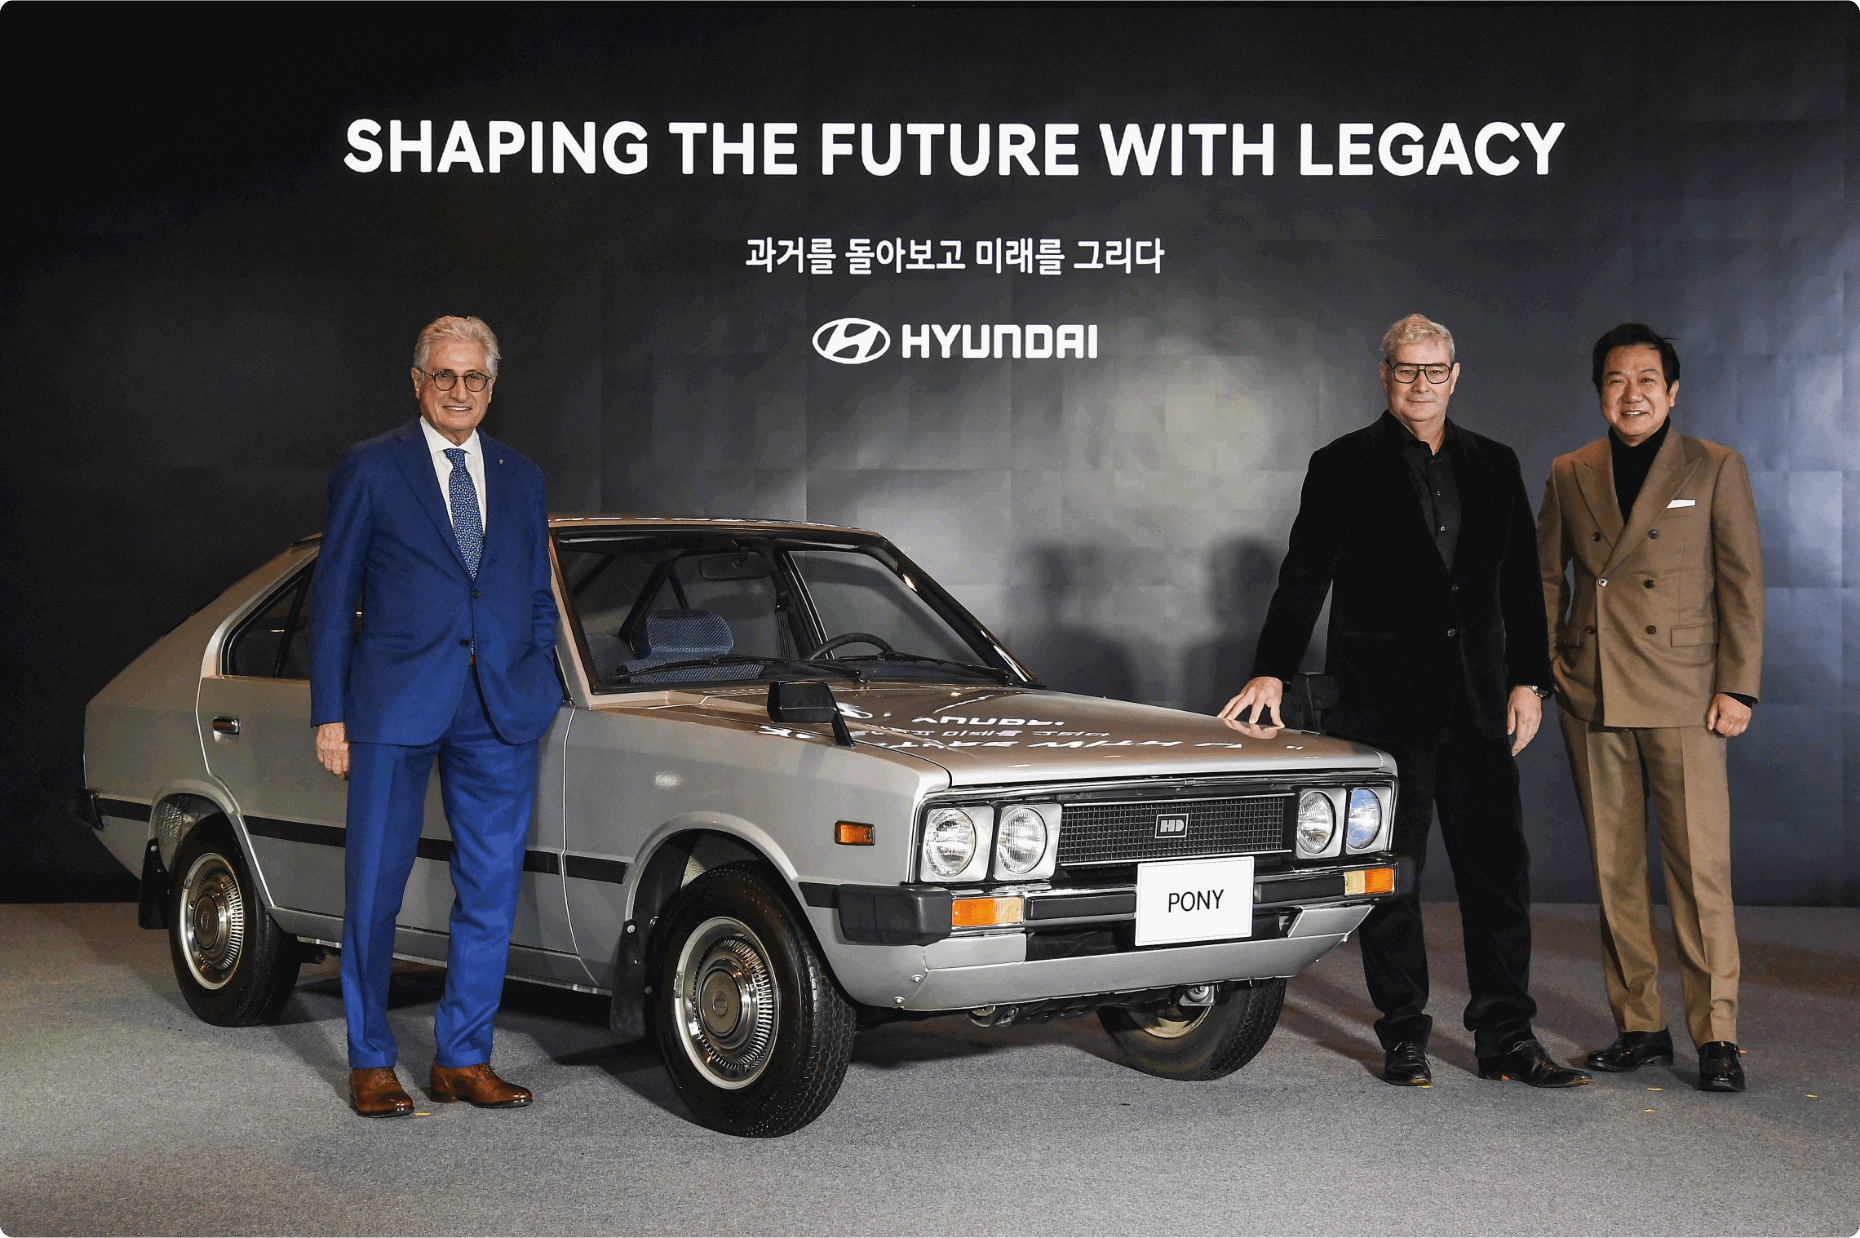 Giorgetto Giugiaro, Luc Donckerwolke, Chief Creative Officer of Hyundai Motor Group, and Sang-yup Lee, Executive Vice President and Head of Hyundai Motor's Global Design Center, standing next to a Pony.